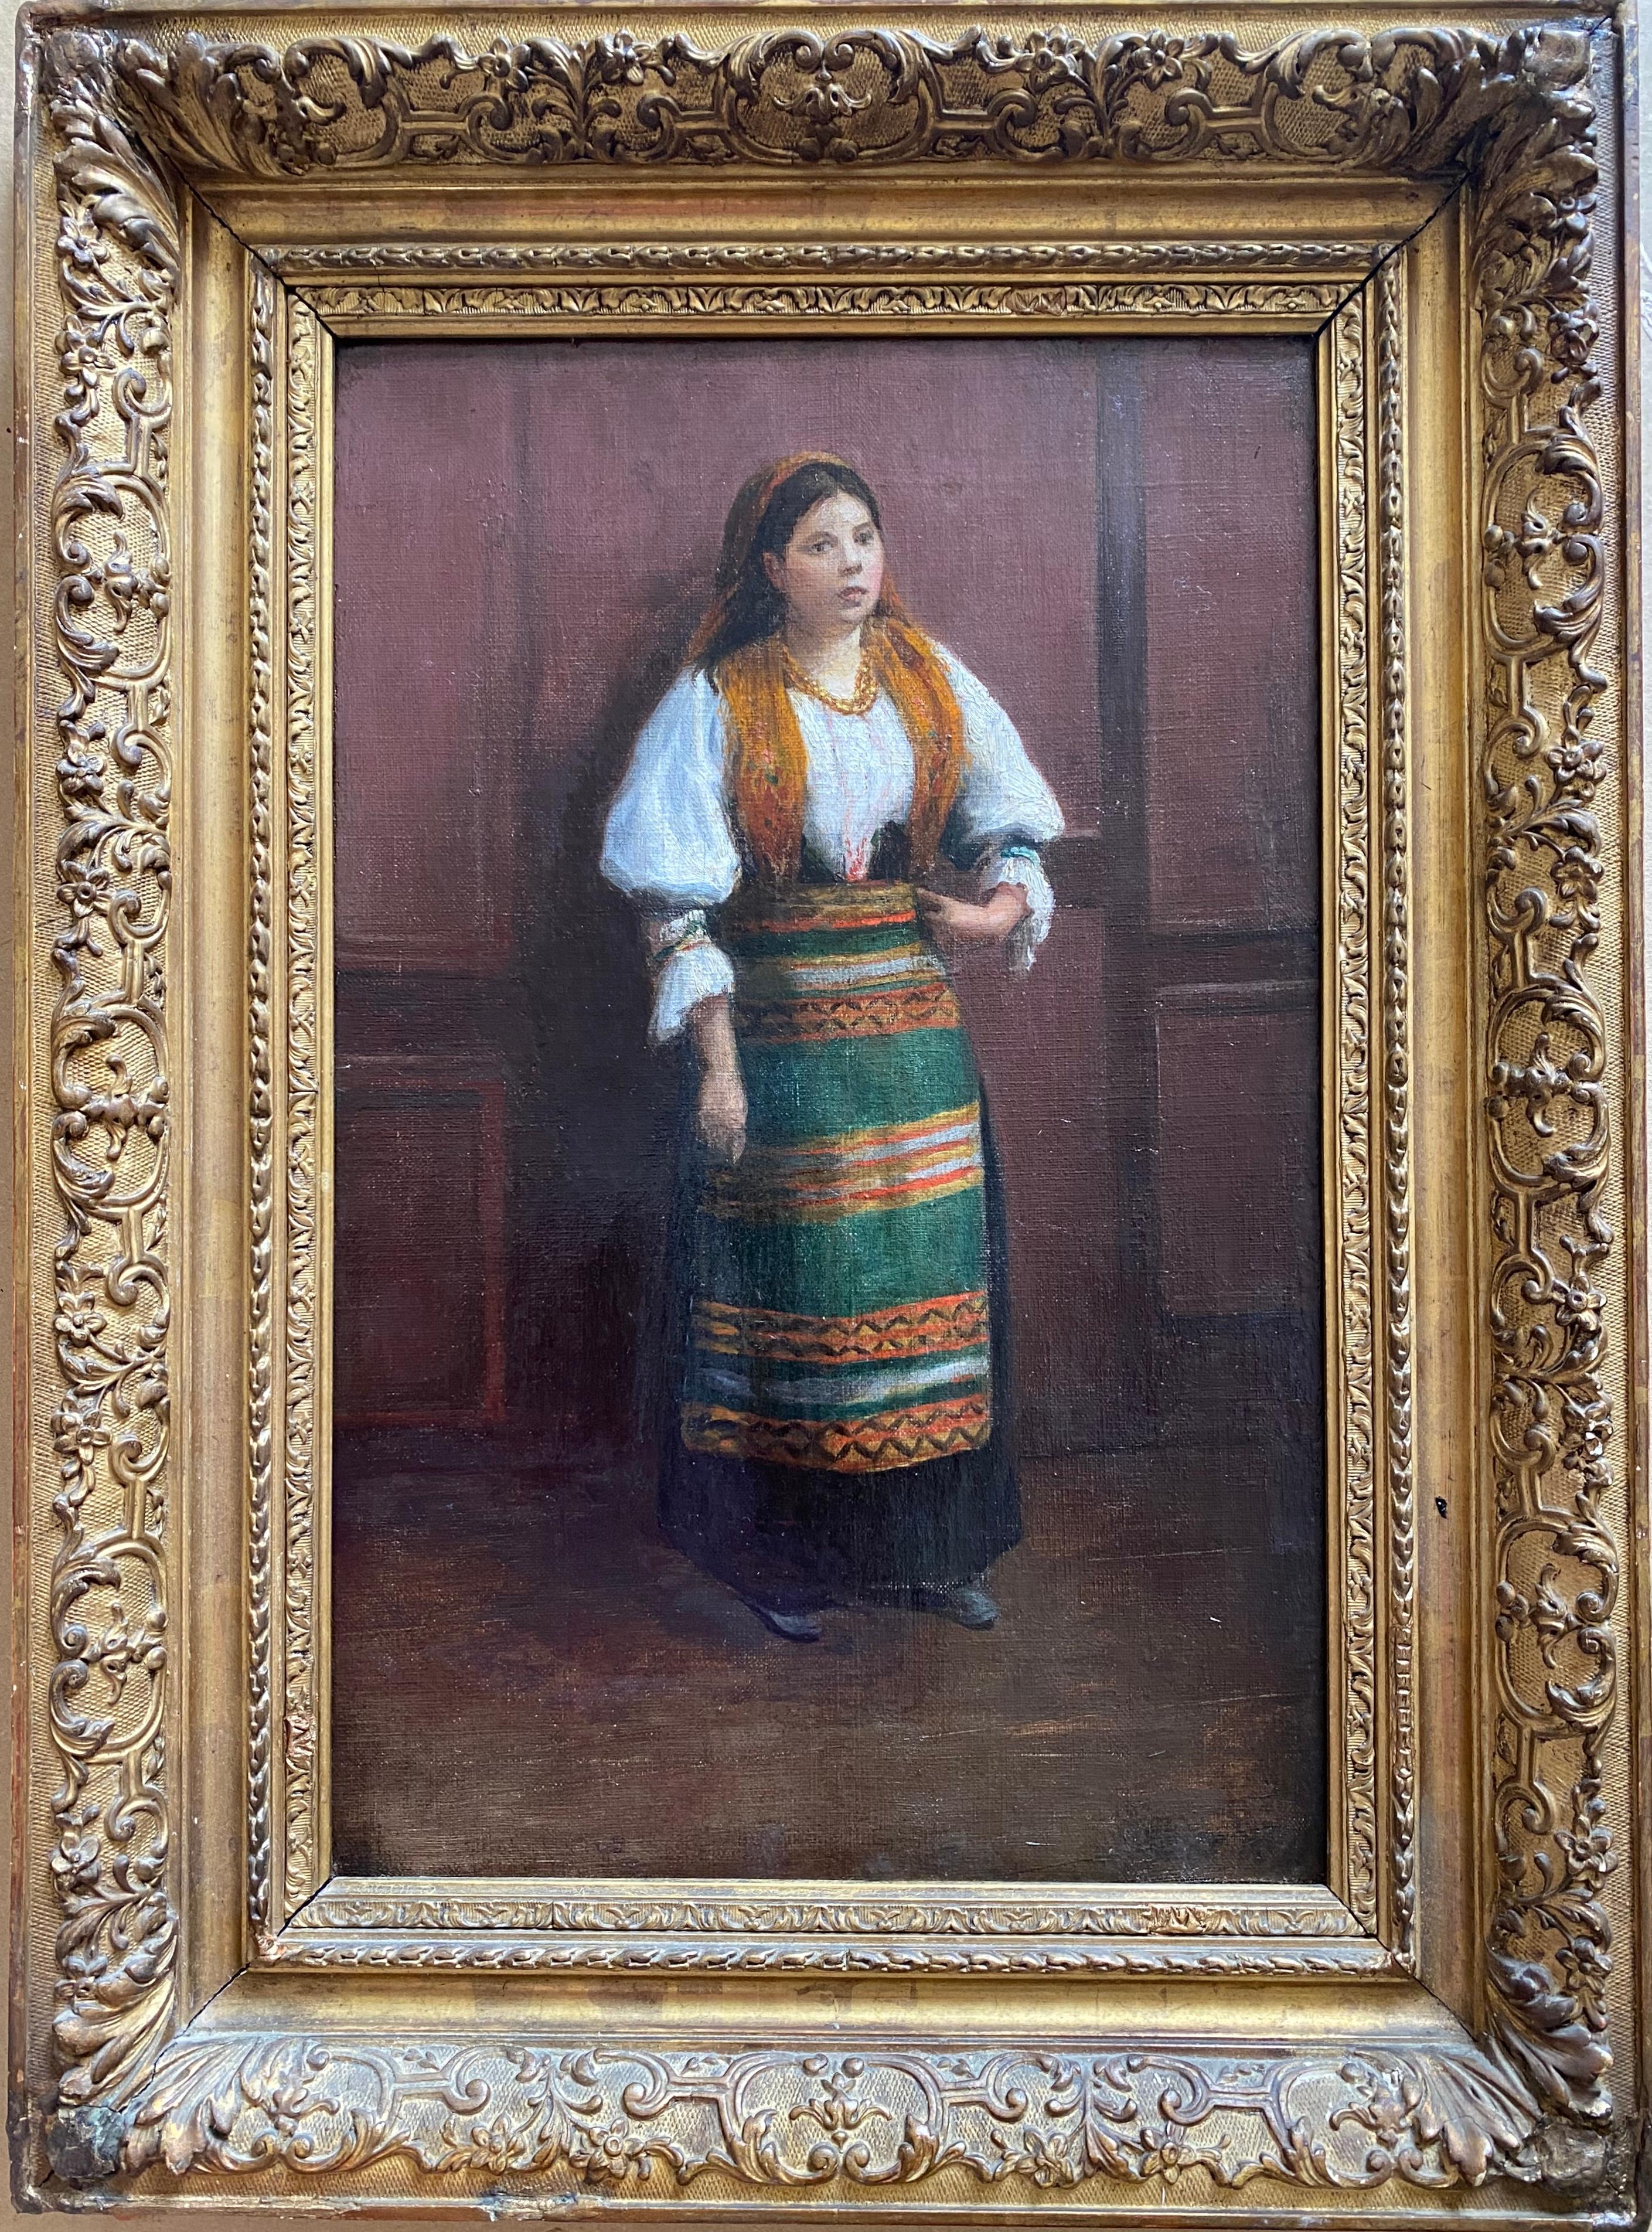 Unknown Portrait Painting – The first time model: the enigmatic young bohemian girl in traditional dress  